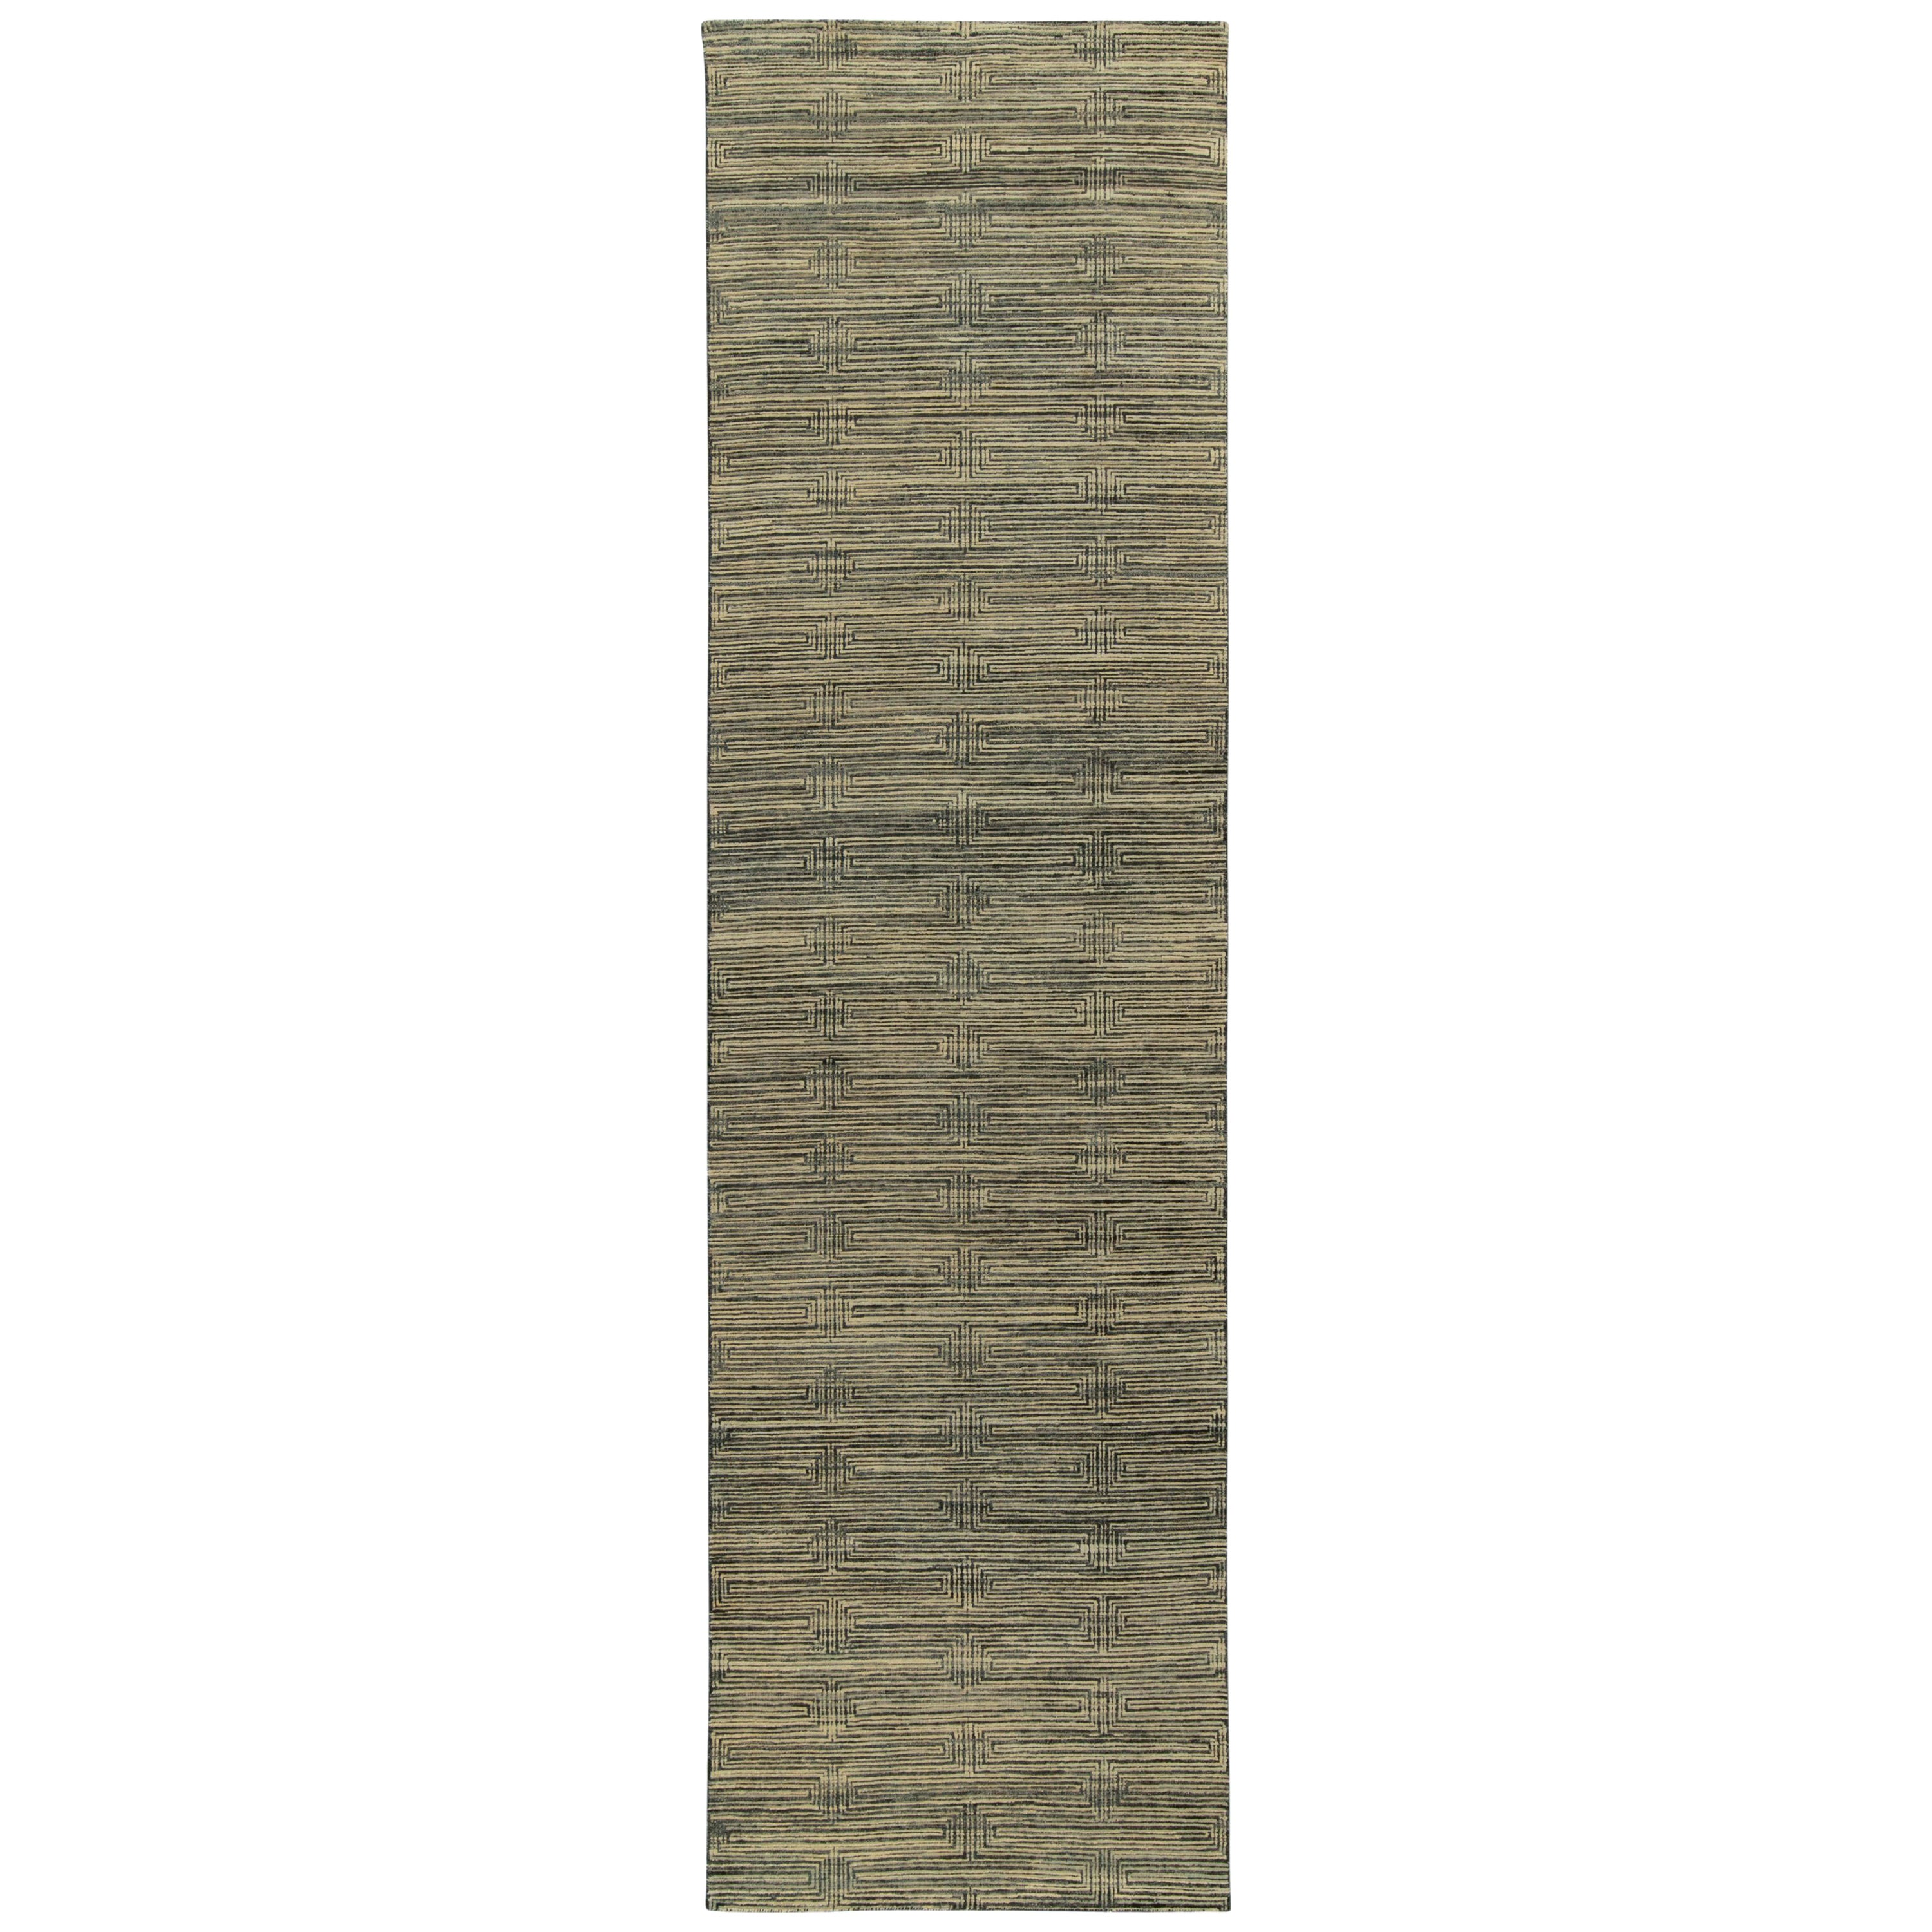 Rug & Kilim’s Contemporary Rug in Beige, Blac and Blue Striae, Geometric Pattern For Sale